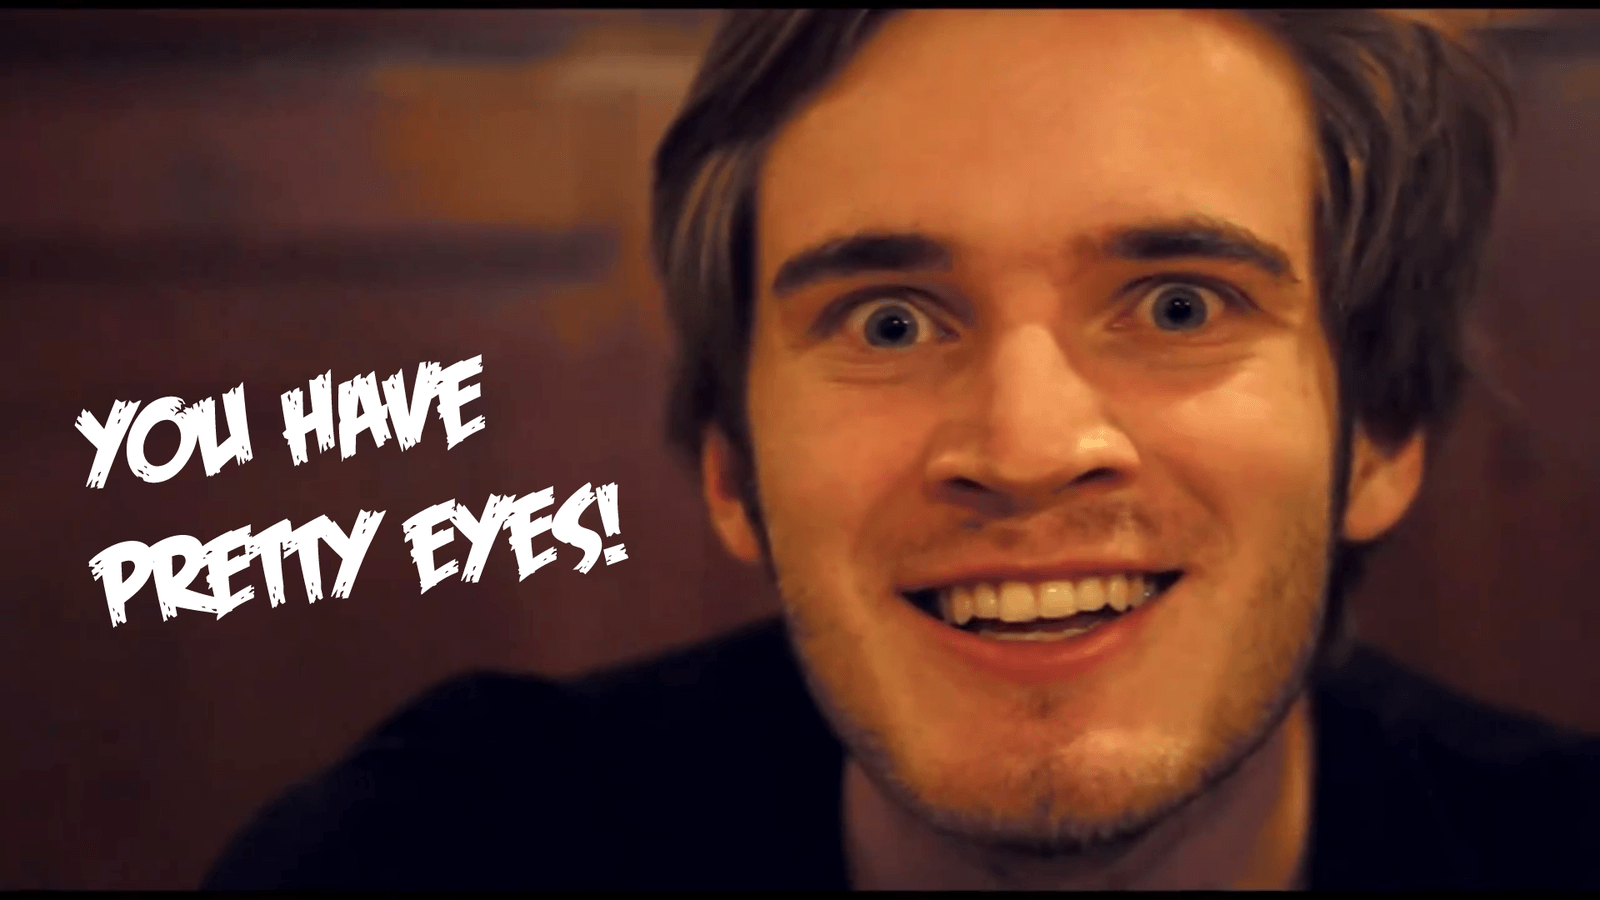 1000+ image about Pewdiepie